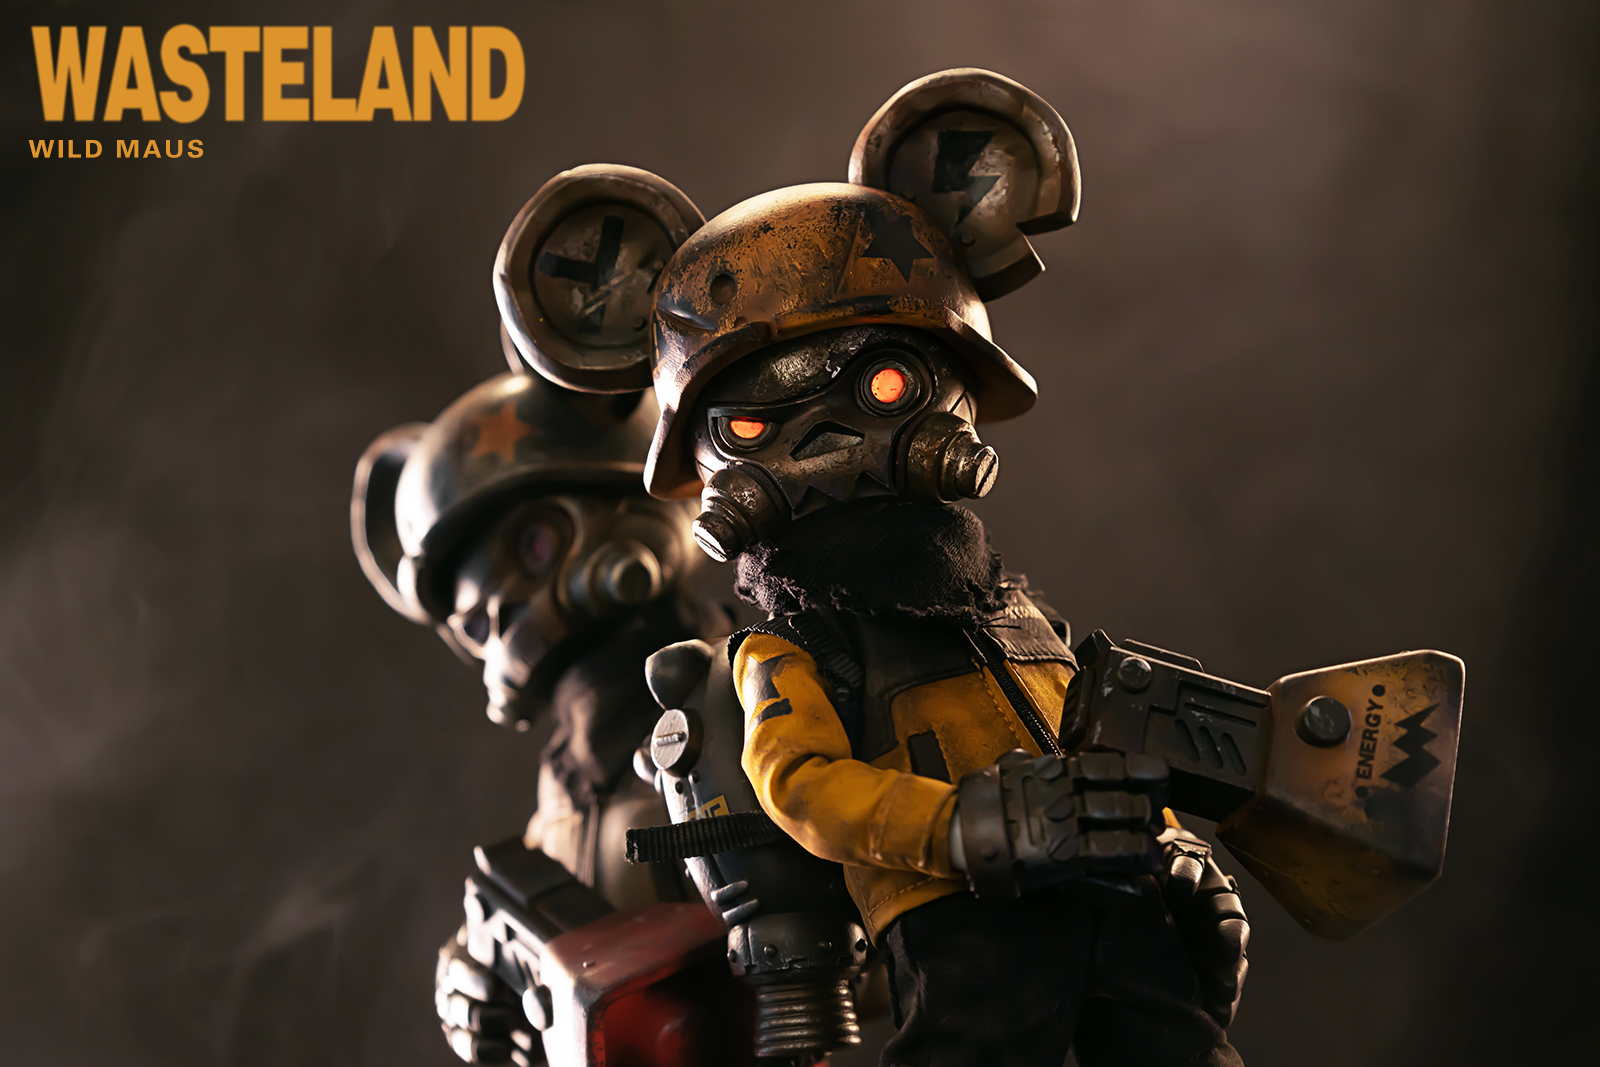 Toy figurine of Wasteland - Wild Maus character with gun, jacket, and energy gun, featuring moveable body and interchangeable faces.